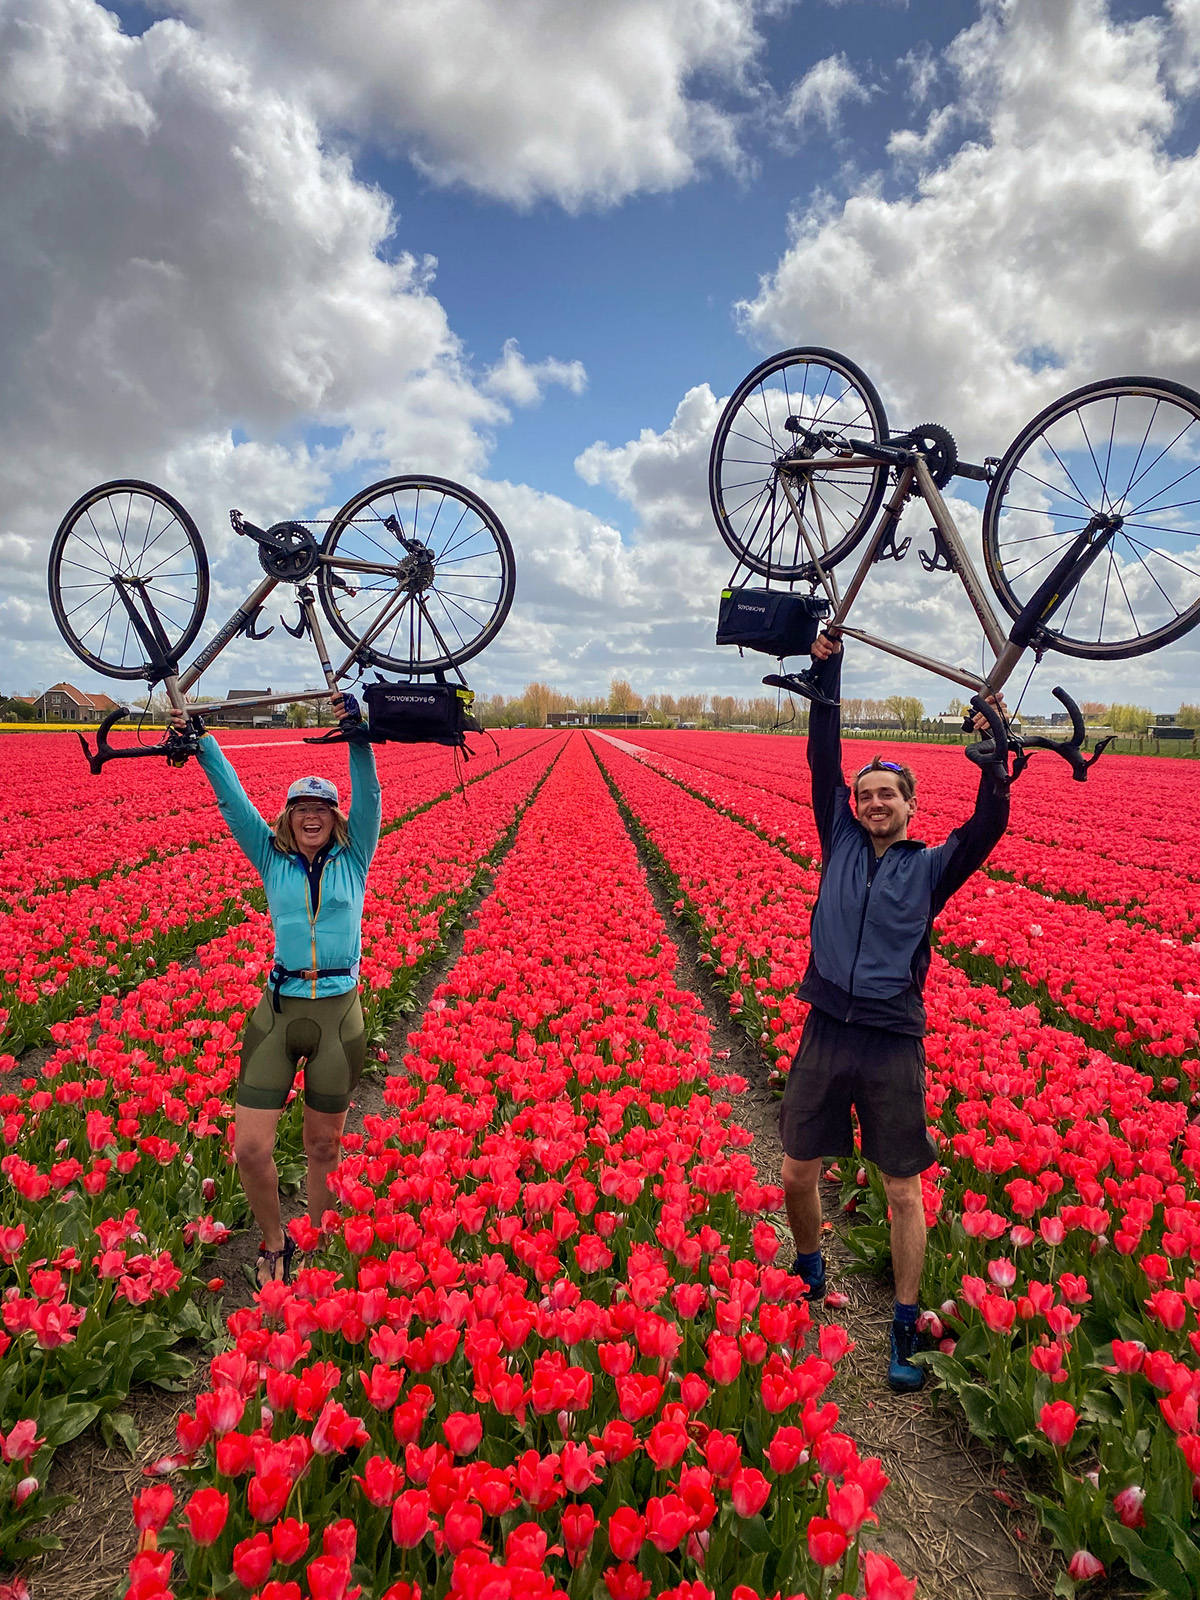 Man and woman carrying bikes in a field of red flowers